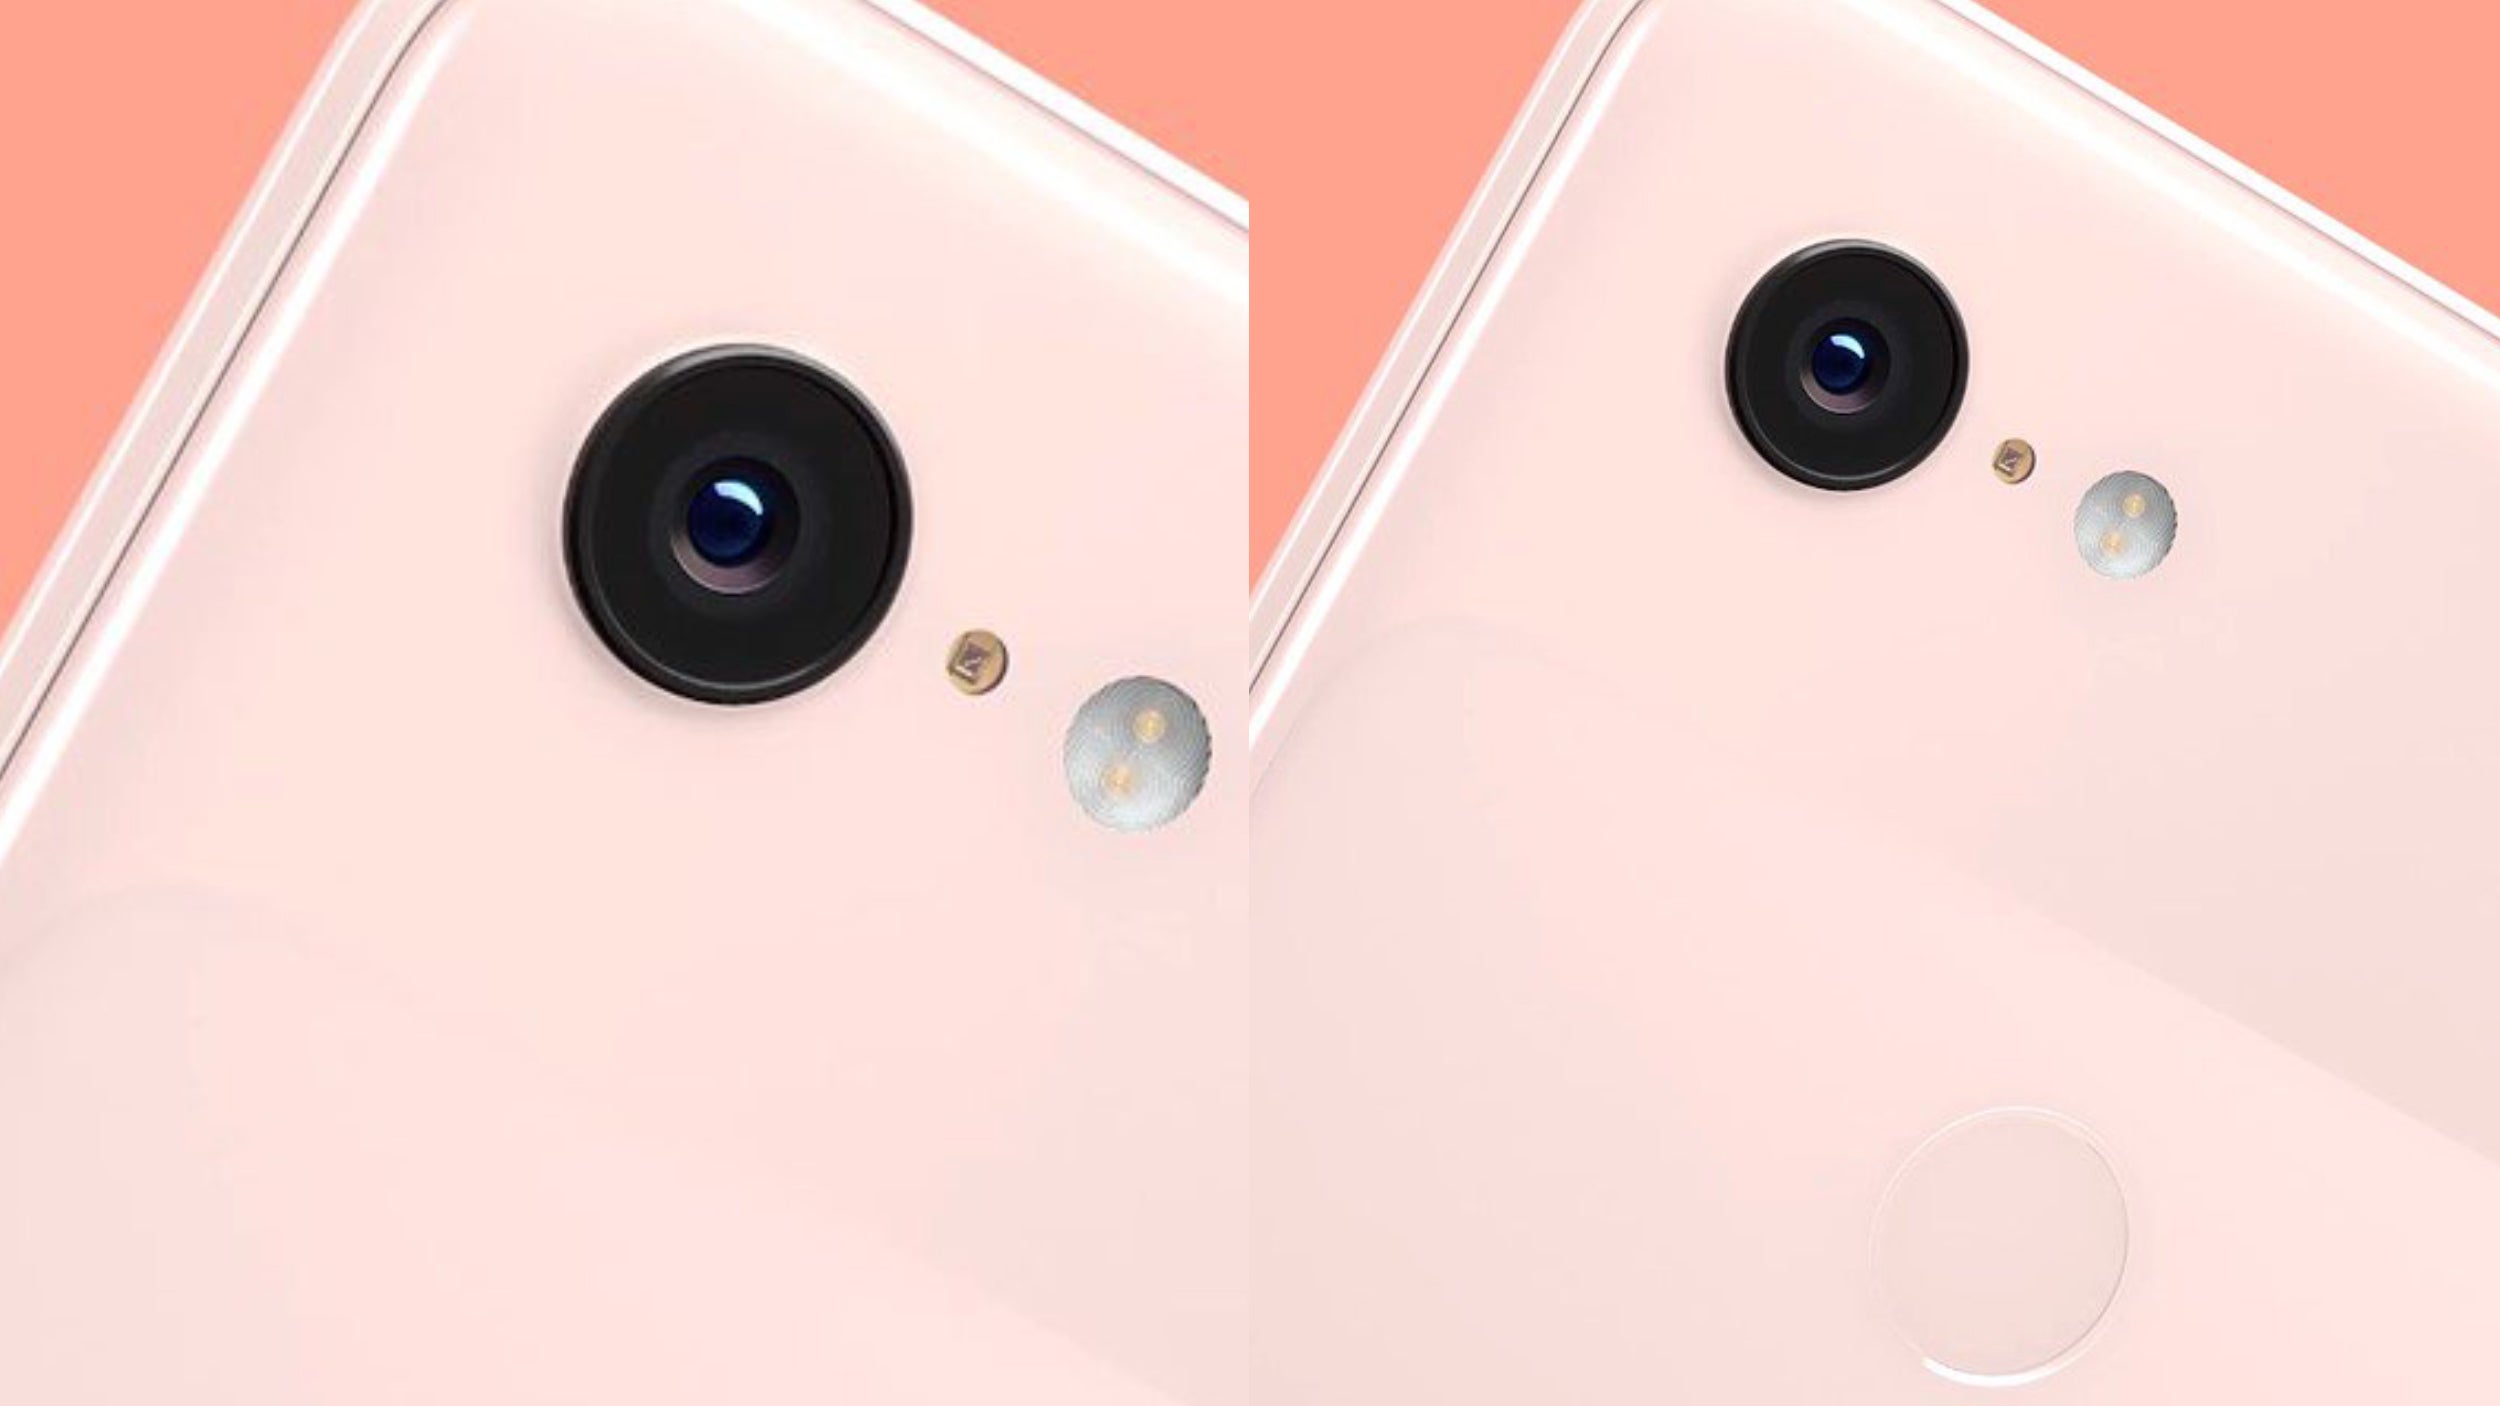 Google&#039;s Pixel 3 was the last mainstream flagship phone that came with only one camera on the back! - About the sensational return of single-camera phones: How, when, and why